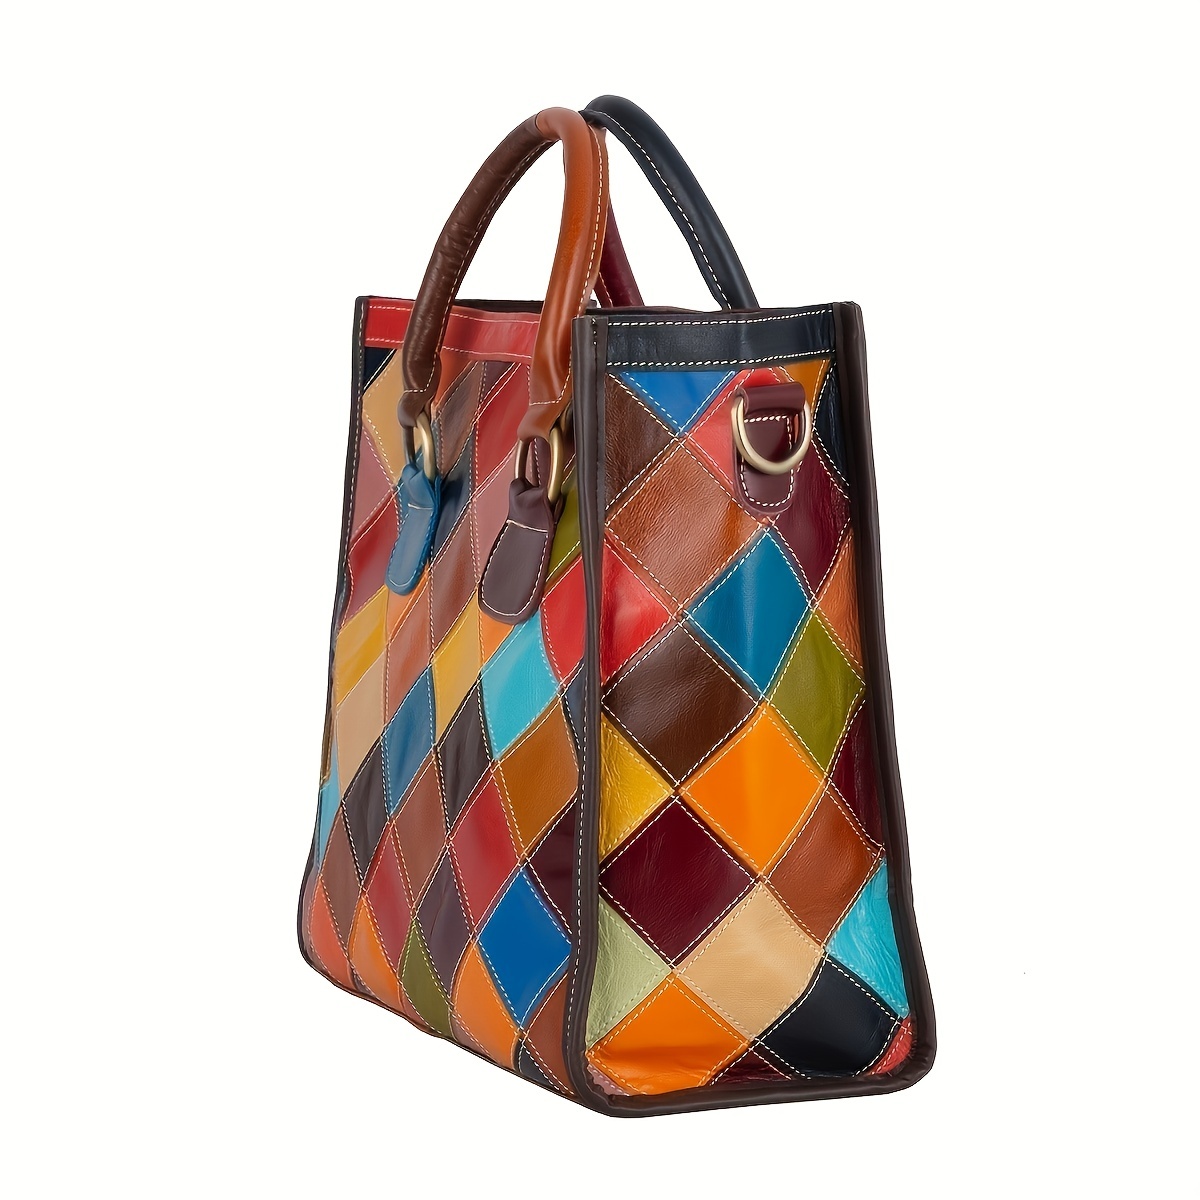 Mini Canvas Tote Bag With Patchwork Design, Genuine Leather